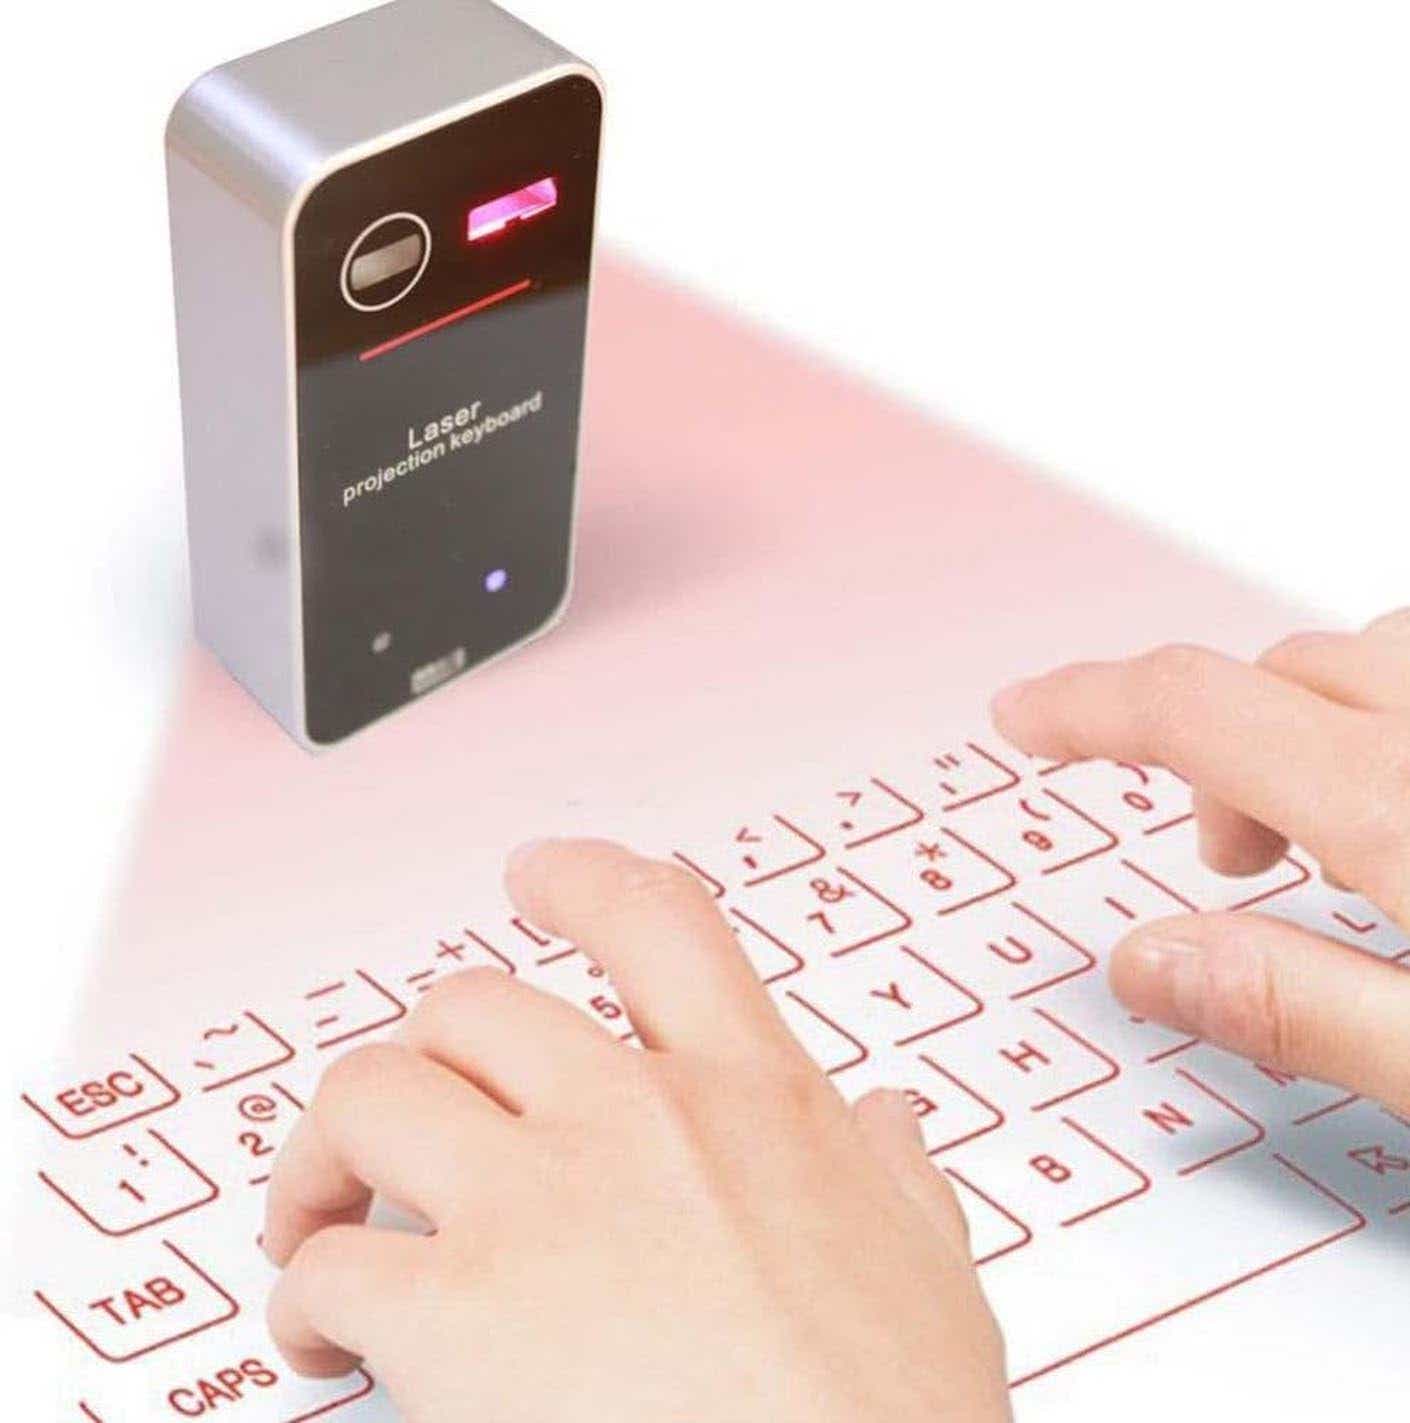 Two hands operate a wireless laser projected keyboard.